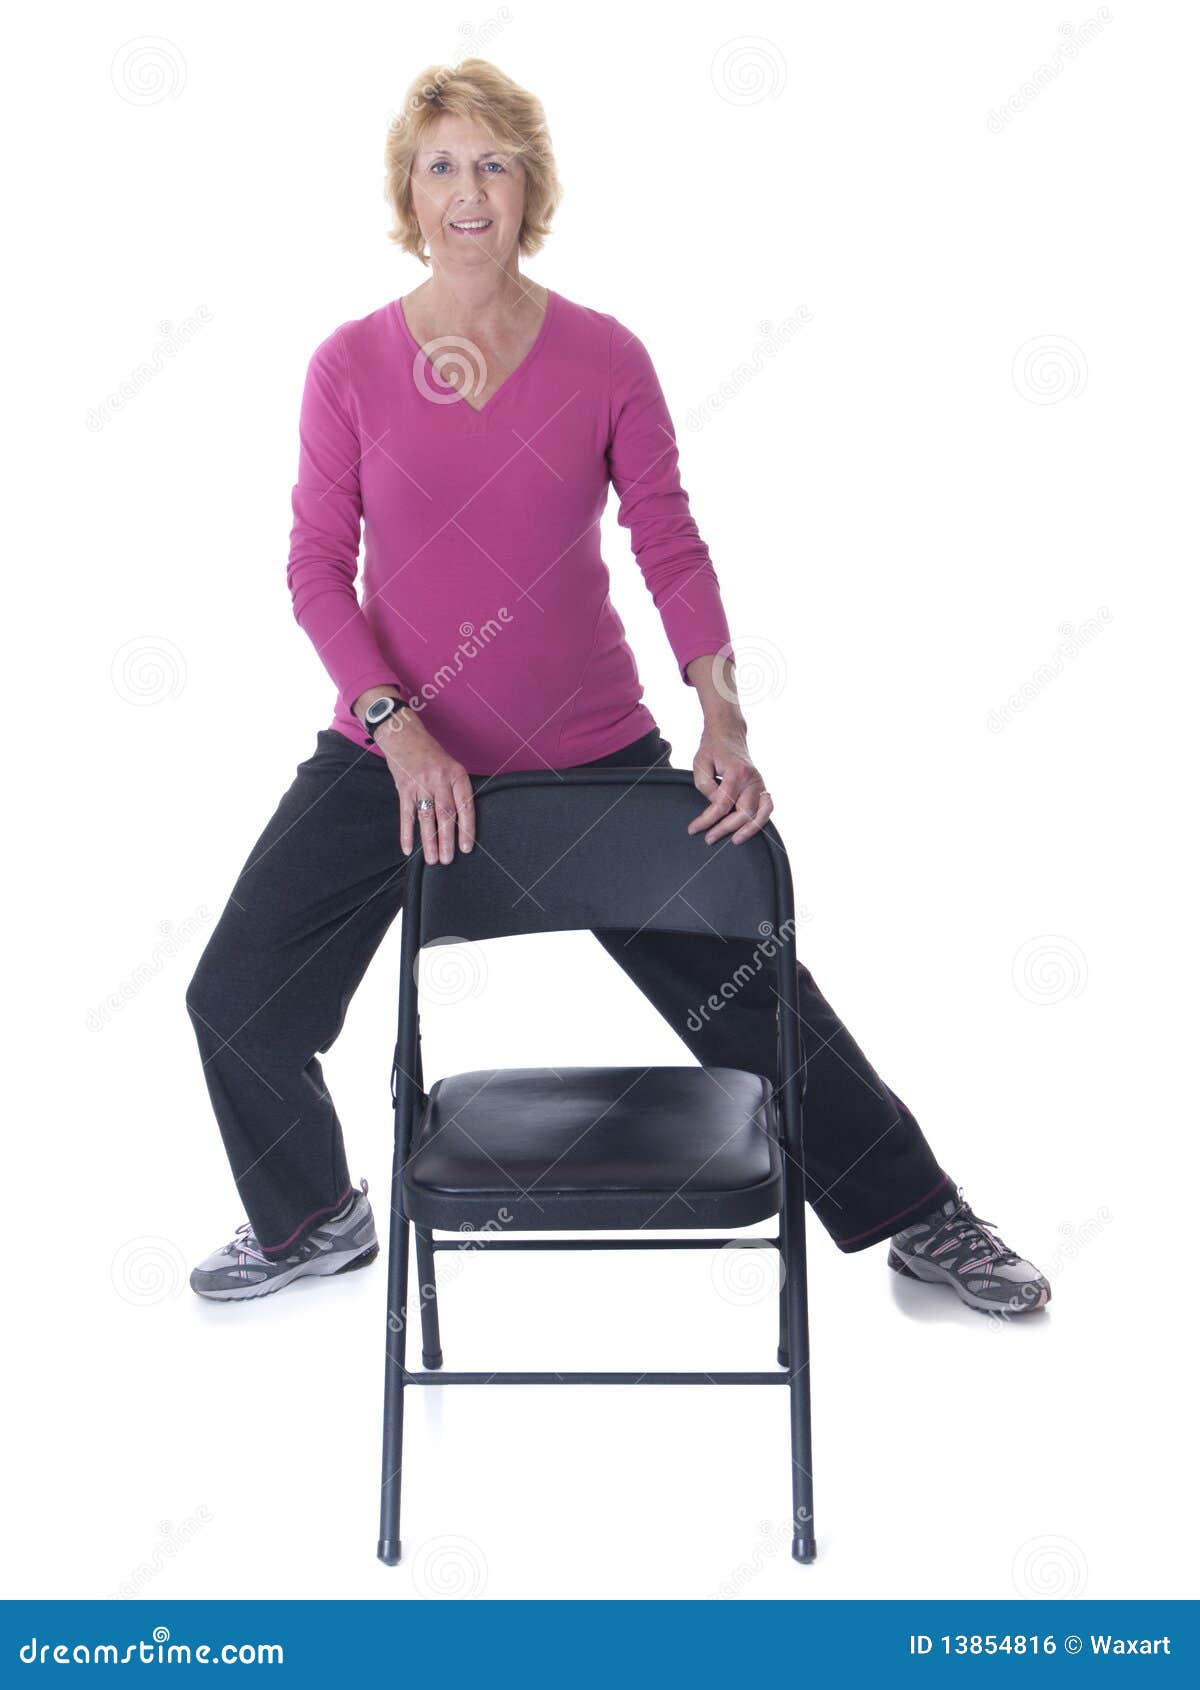 senior woman exercising with chair